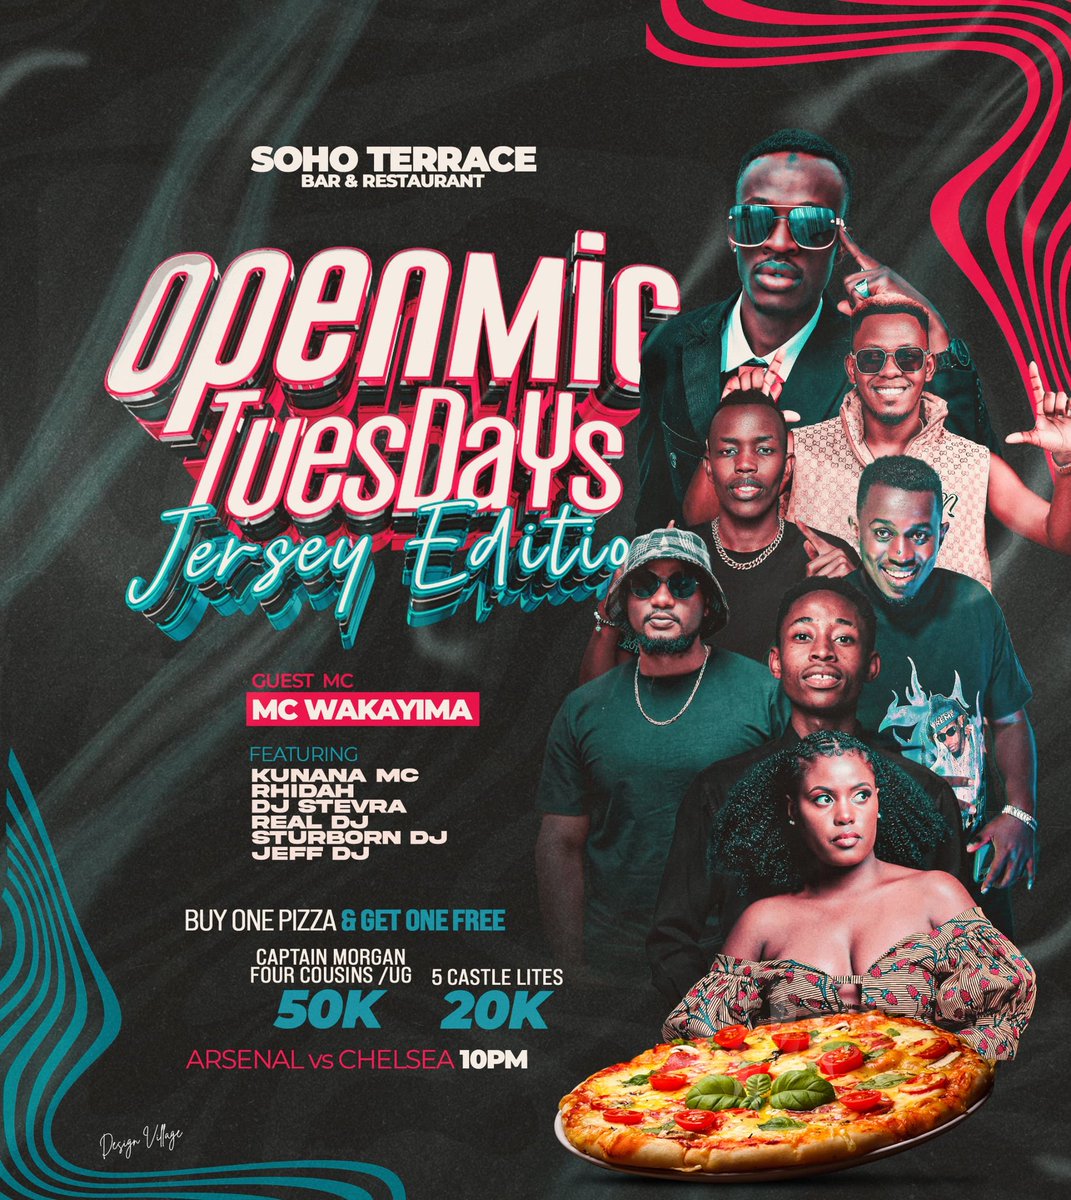 We go again tonight with #OpenMicKaraoke Come spit out all your stress at Soho Terrace